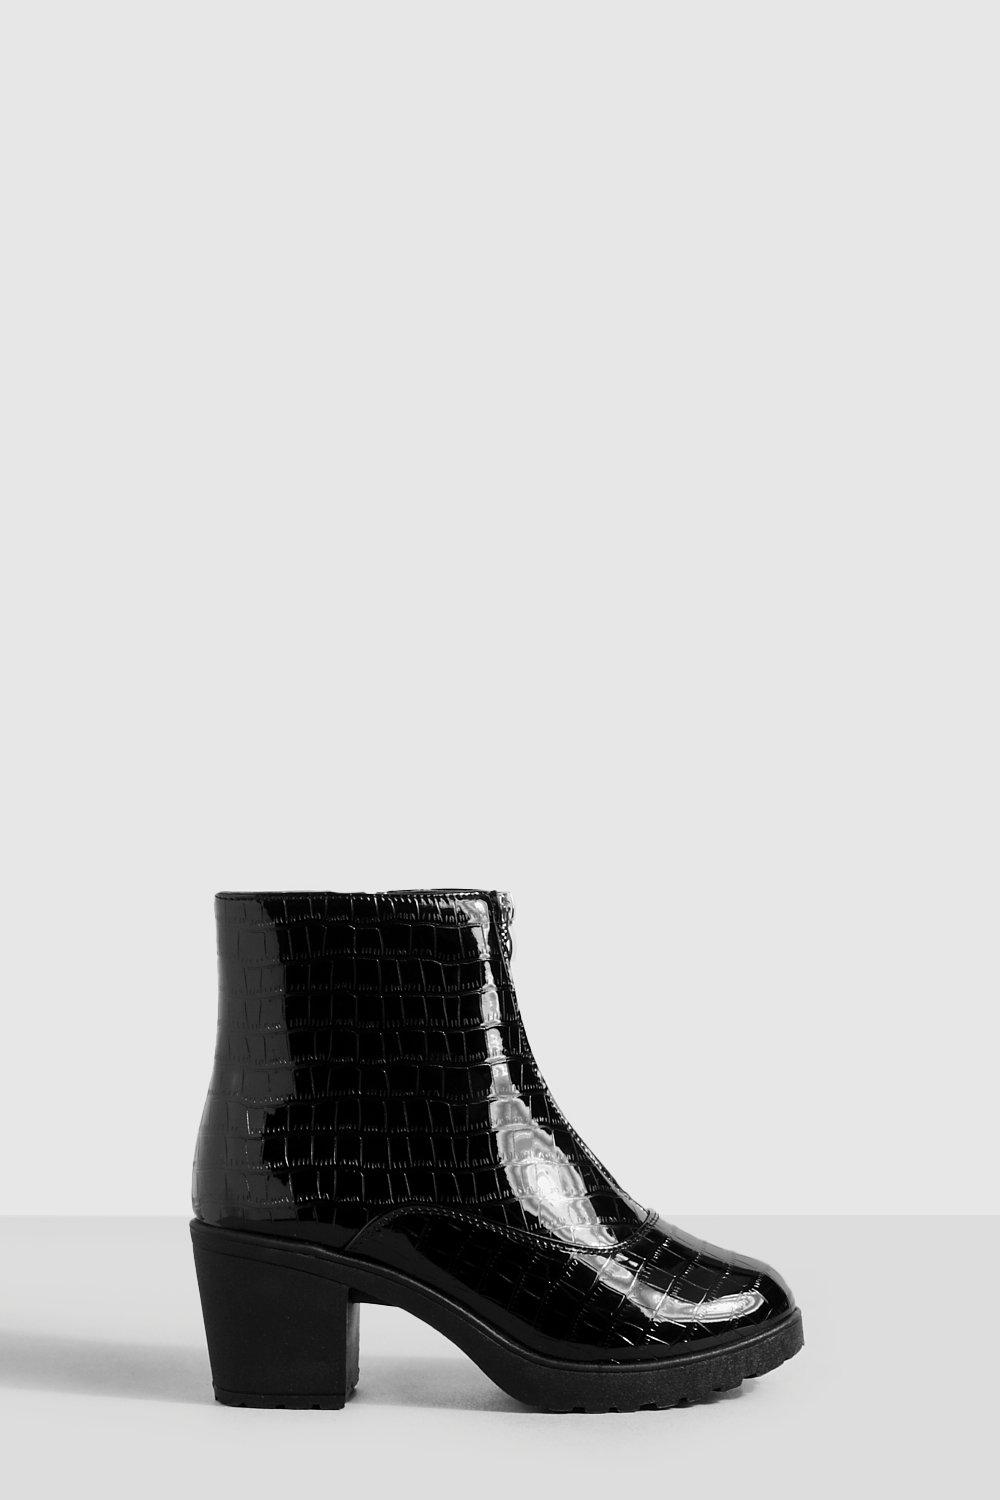 Boots | Croc Zip Front Ankle Boots | boohoo